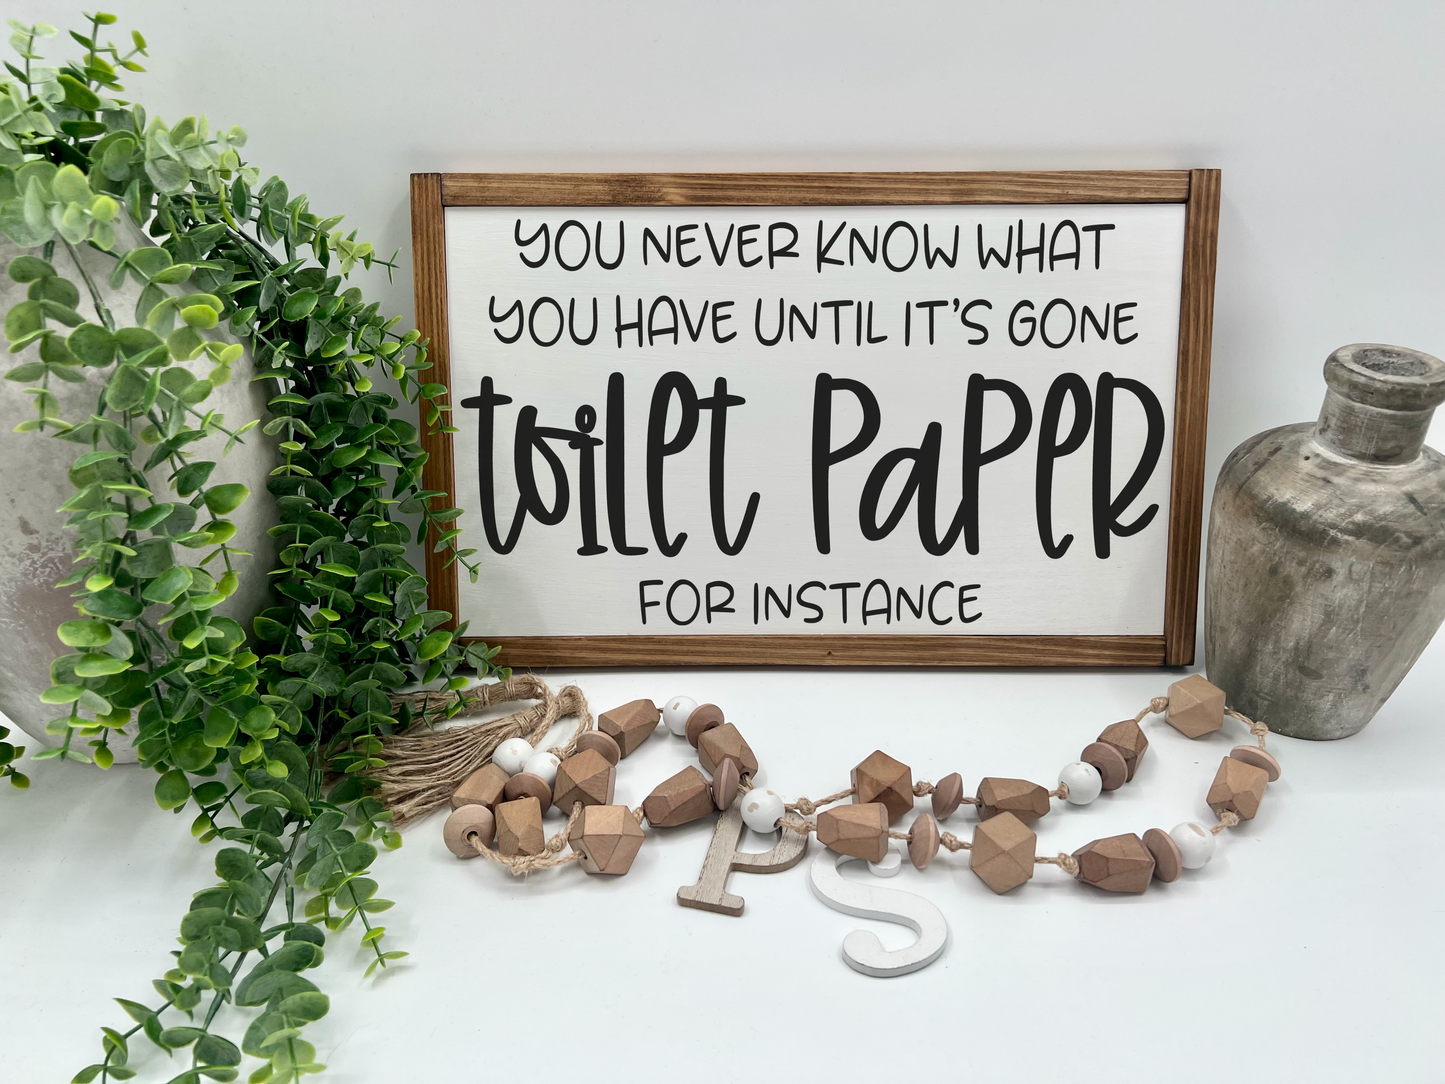 You Never Know What You Have, Toilet Paper - White/Thick/E. Amer. - Wood Sign